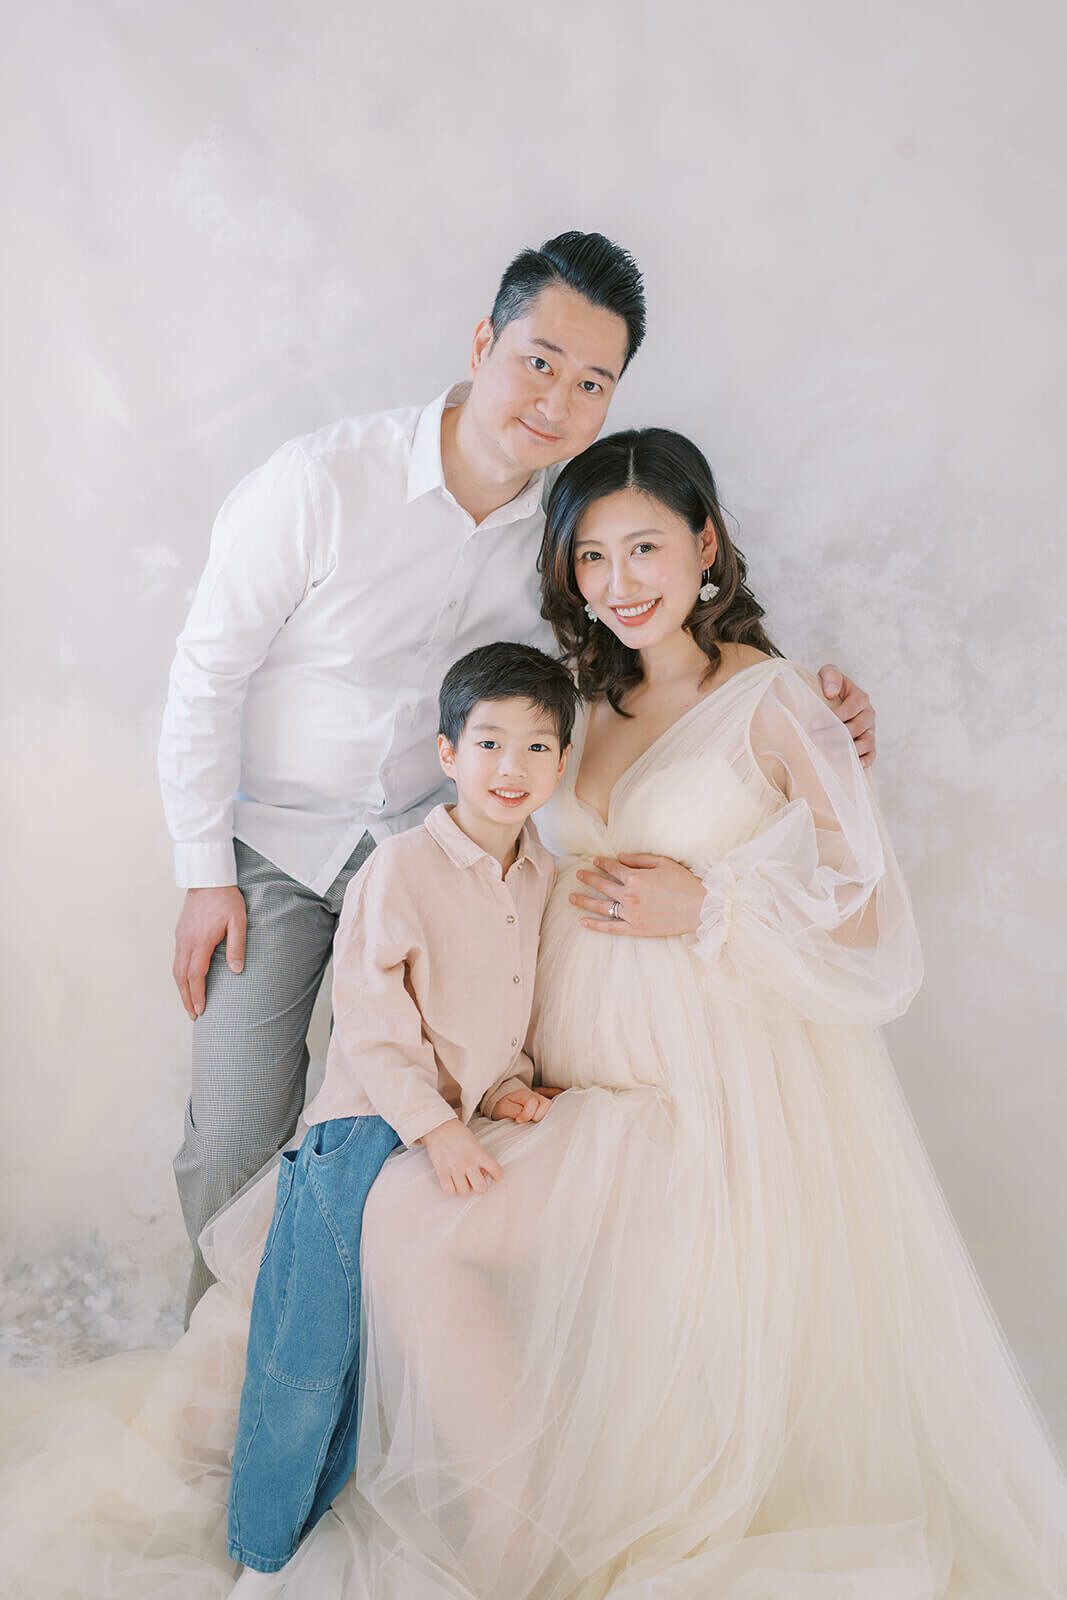 Anticipating joy, an Asian Chinese family illuminates a Gold Coast maternity photography studio in a dreamy cream tulle gown.